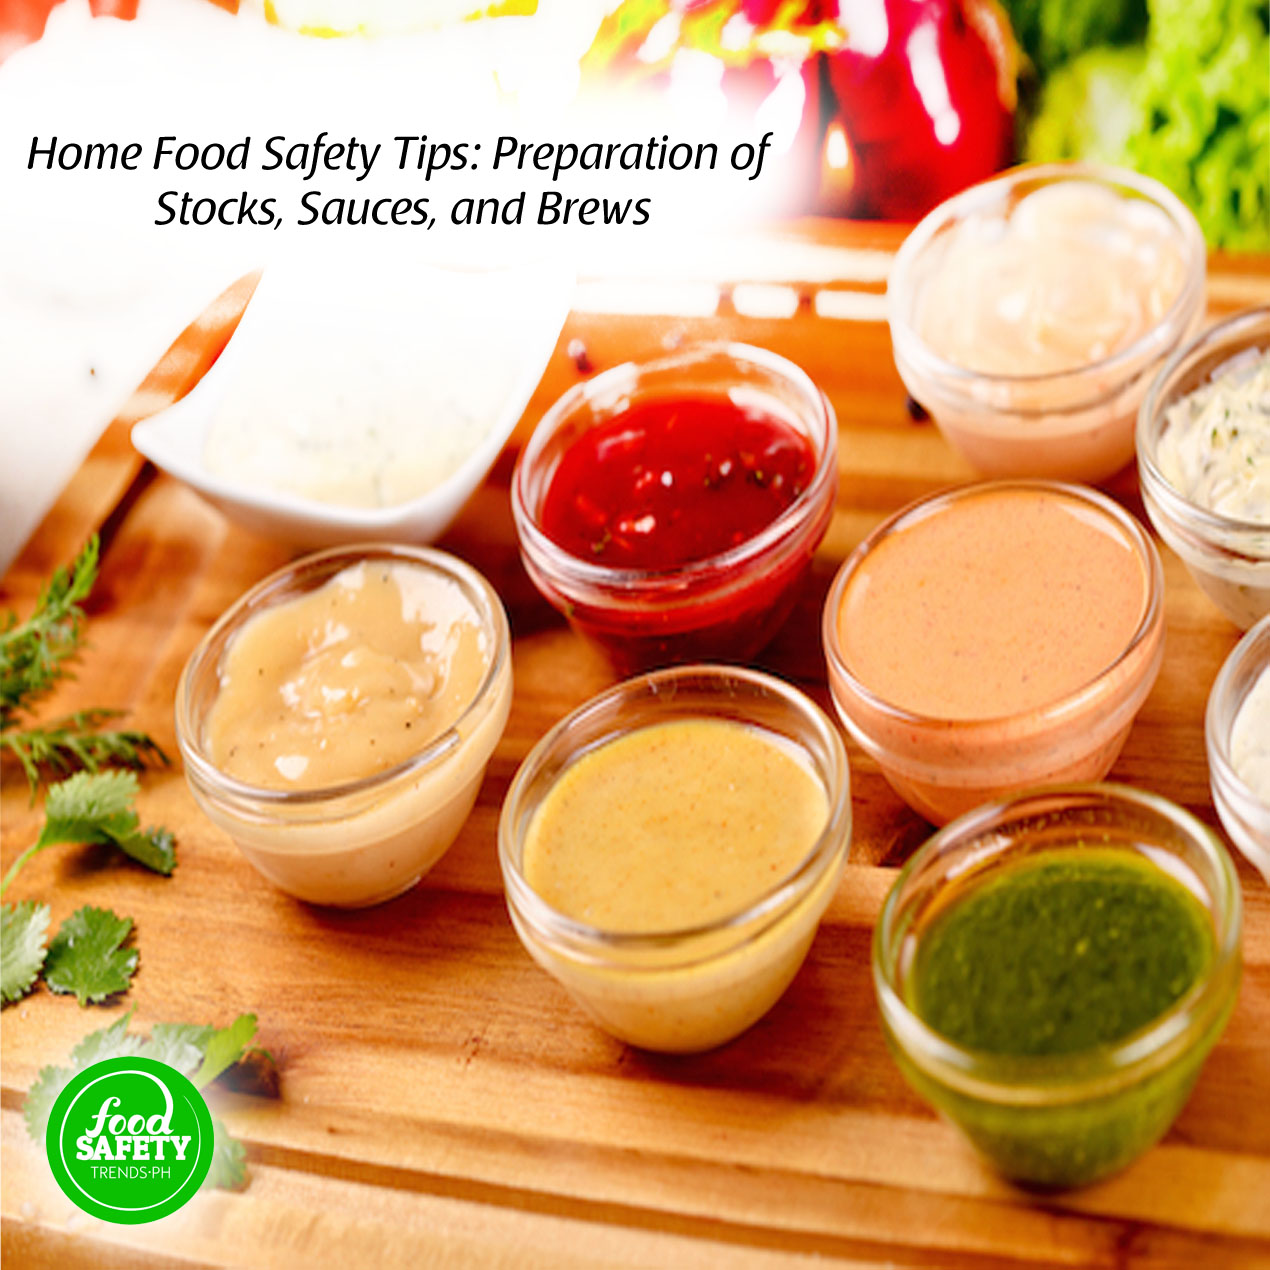 Home Food Safety Tips: Preparation of Stocks, Sauces, and Brews